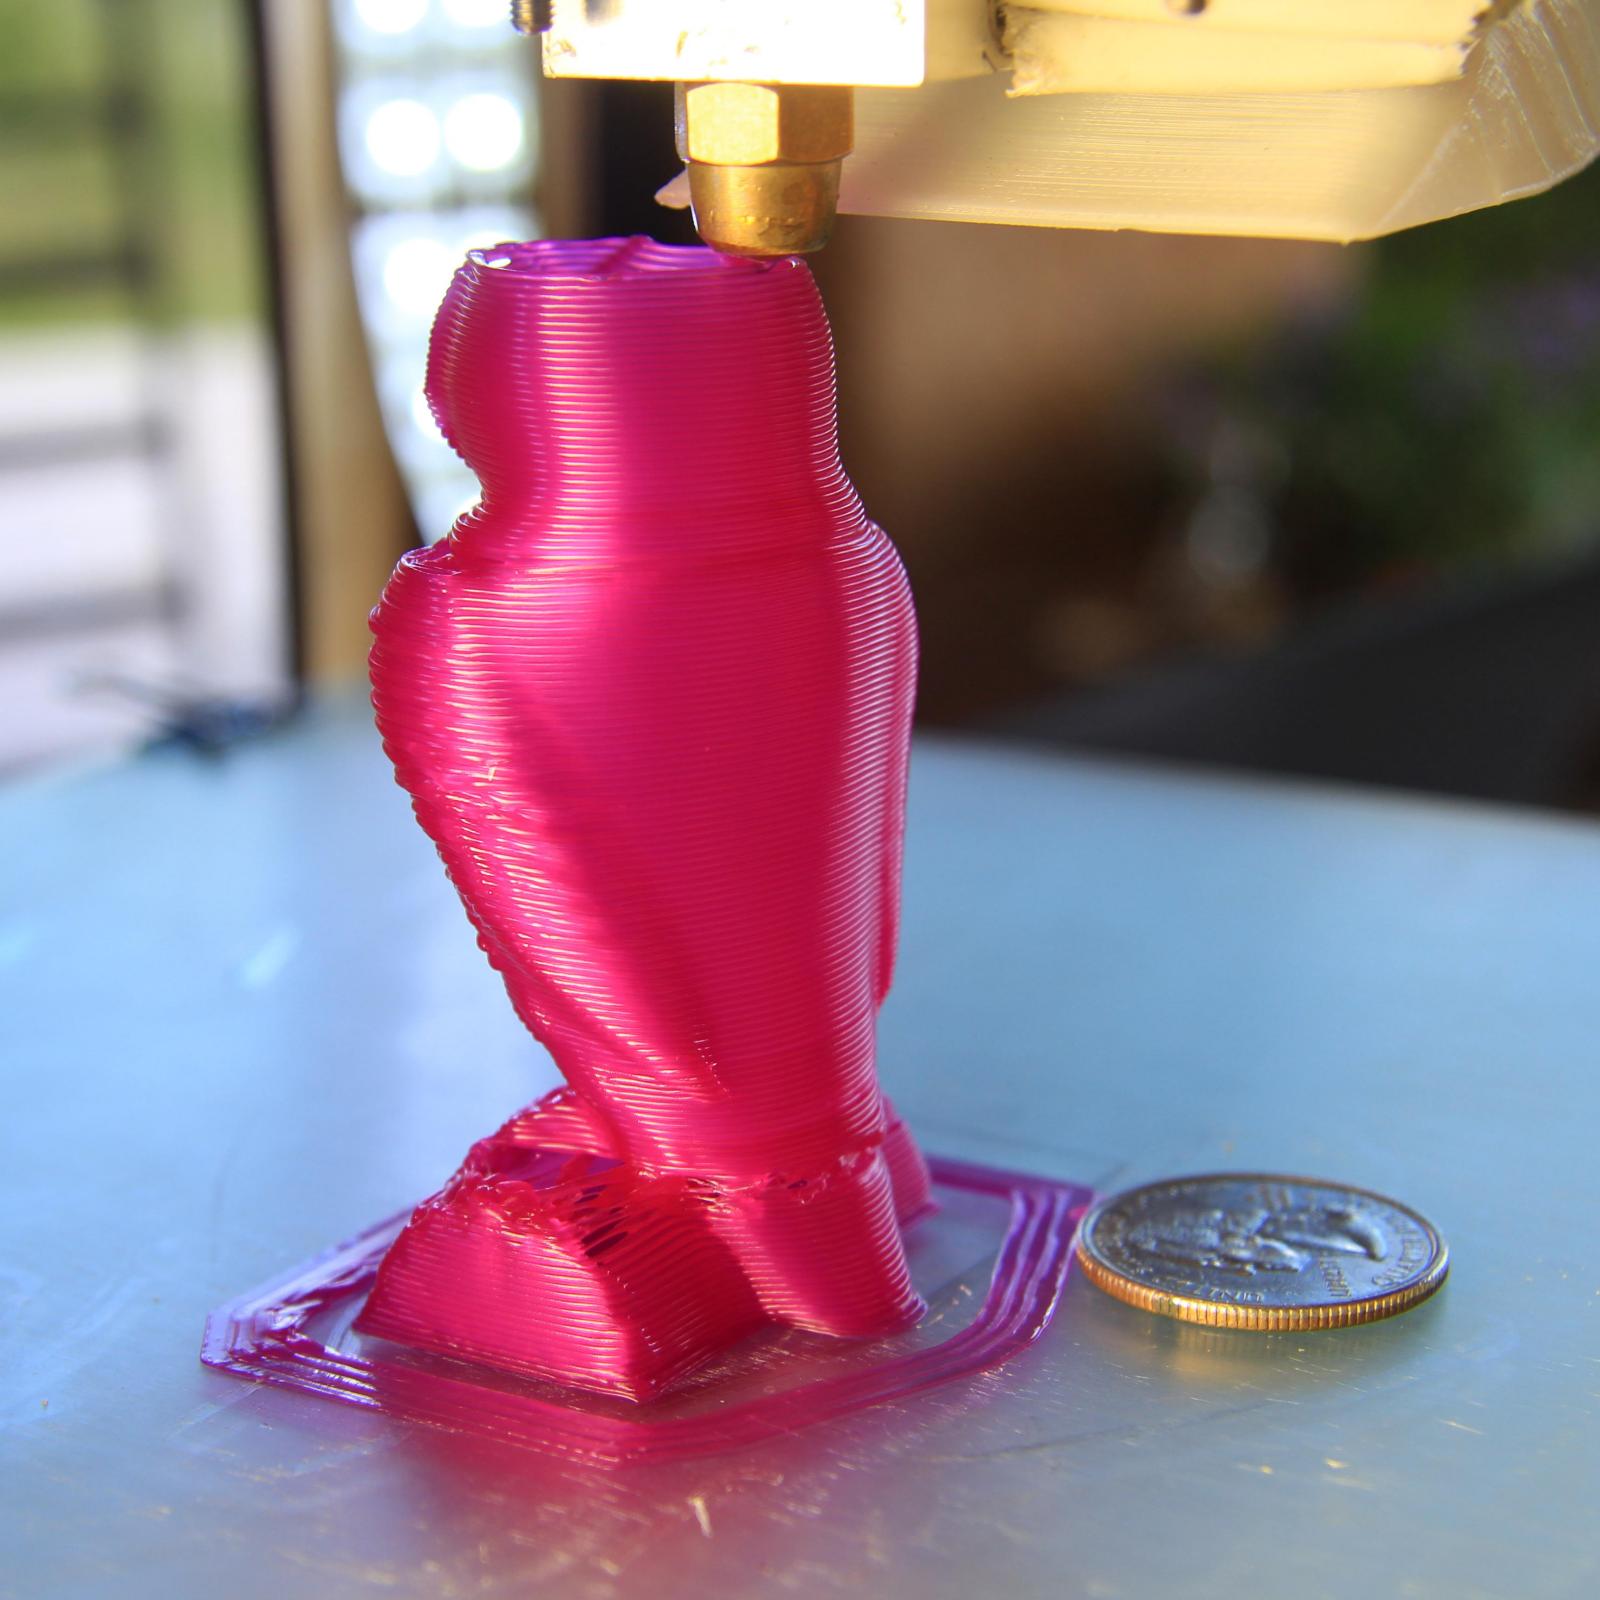 3D improvements: Extremely extrusion with a 1 mm nozzle